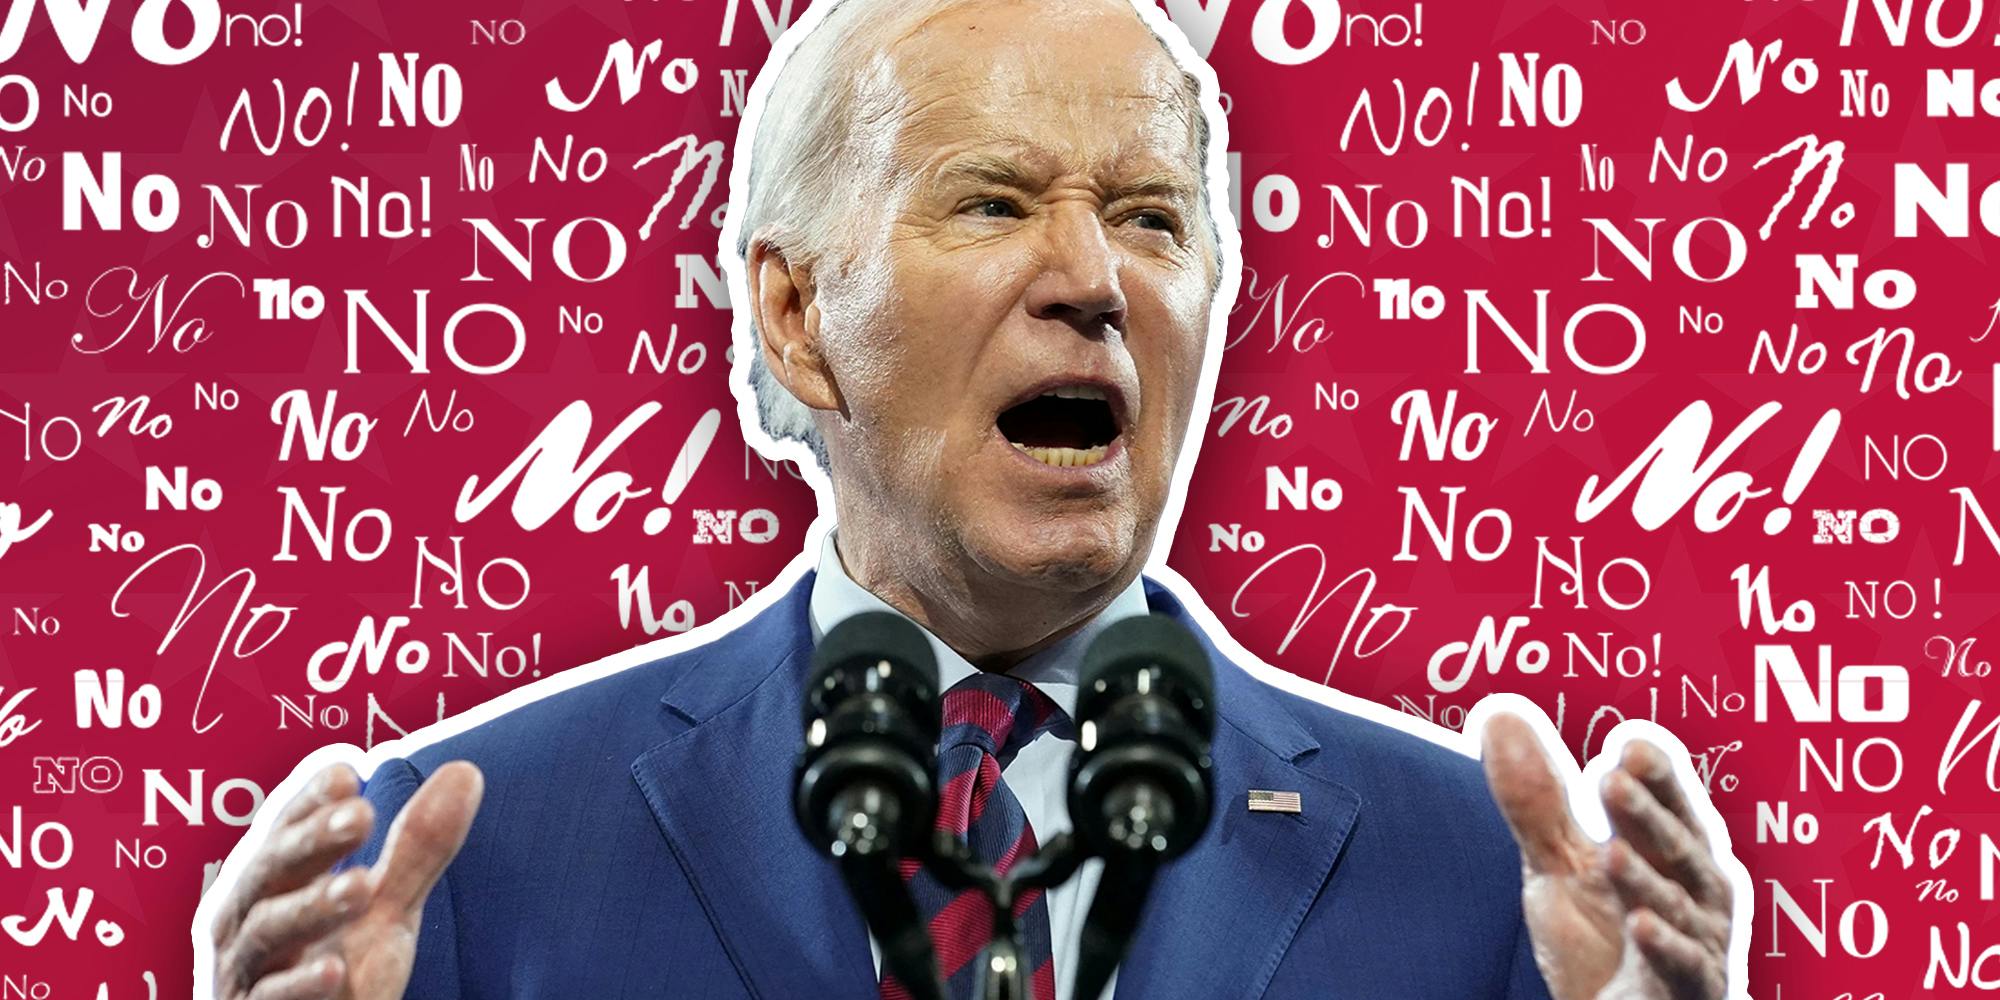 Mega-viral X post compares calls for Biden to drop out to sexual assault